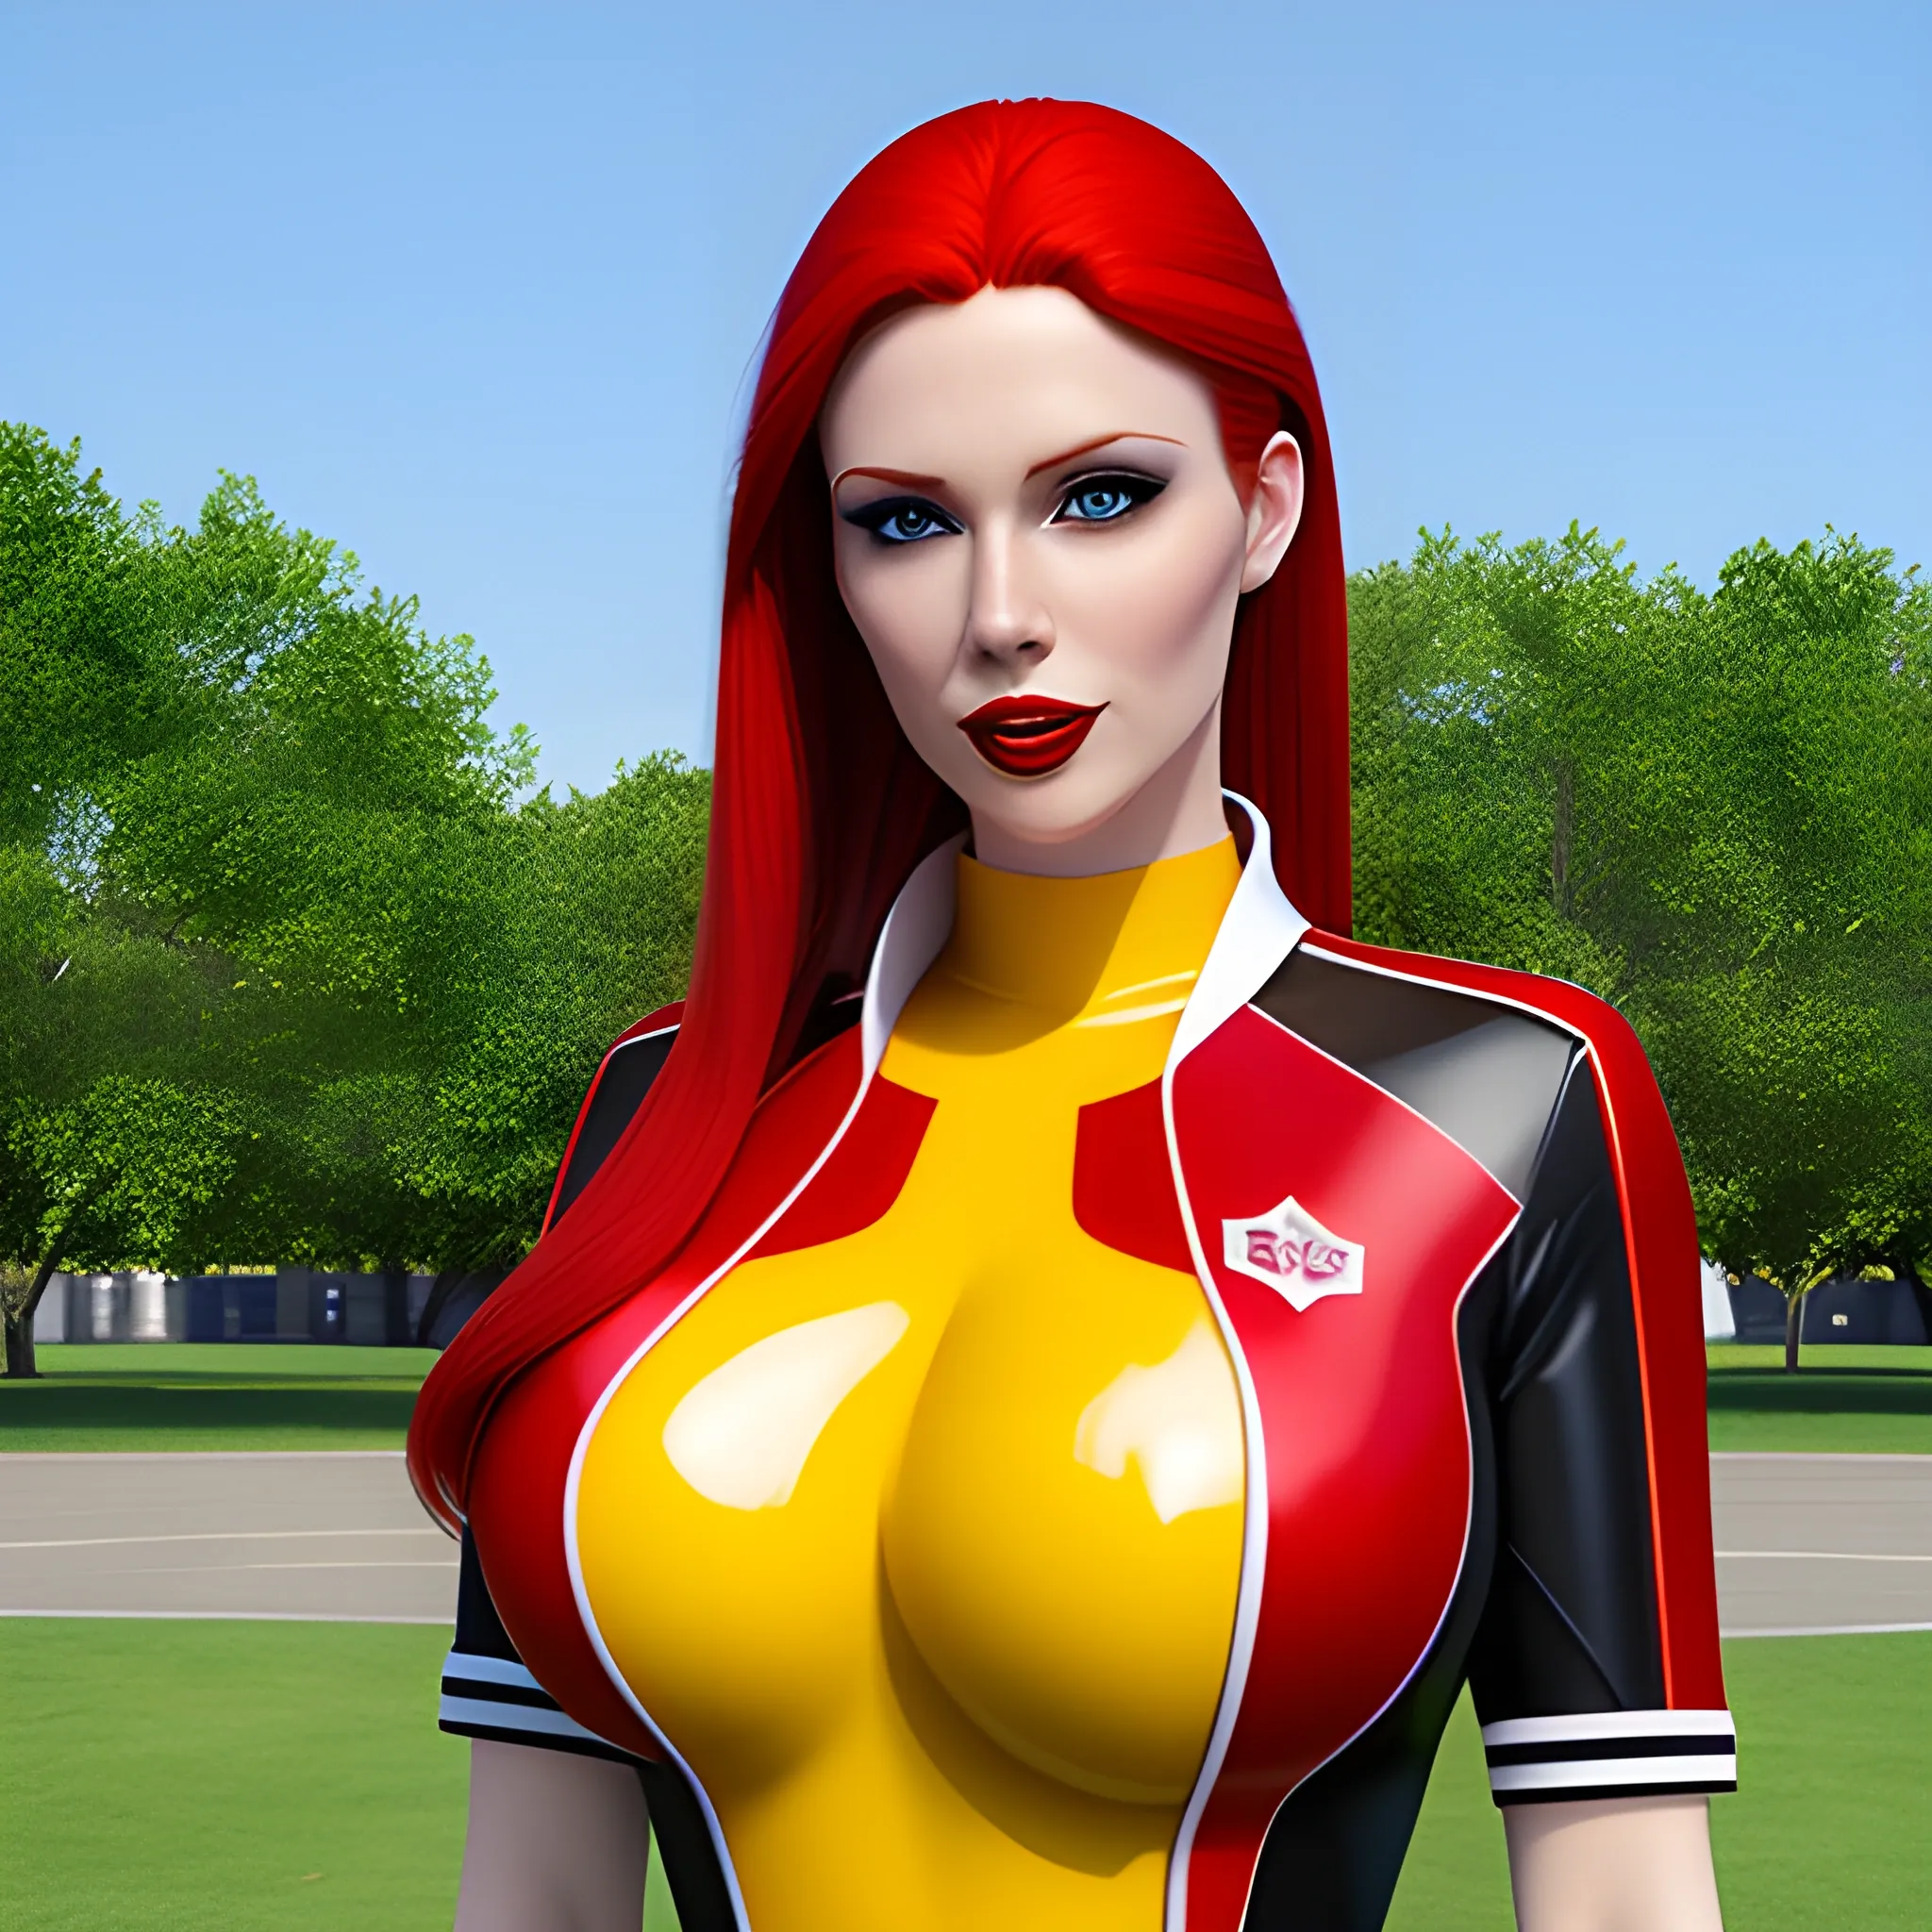 Create a photorealistic image of a red-haired female child wearing a latex English school uniform standing in front of a playground. Pretty eyes, sexy mouth, whole body visible, lots of skin, maximum details